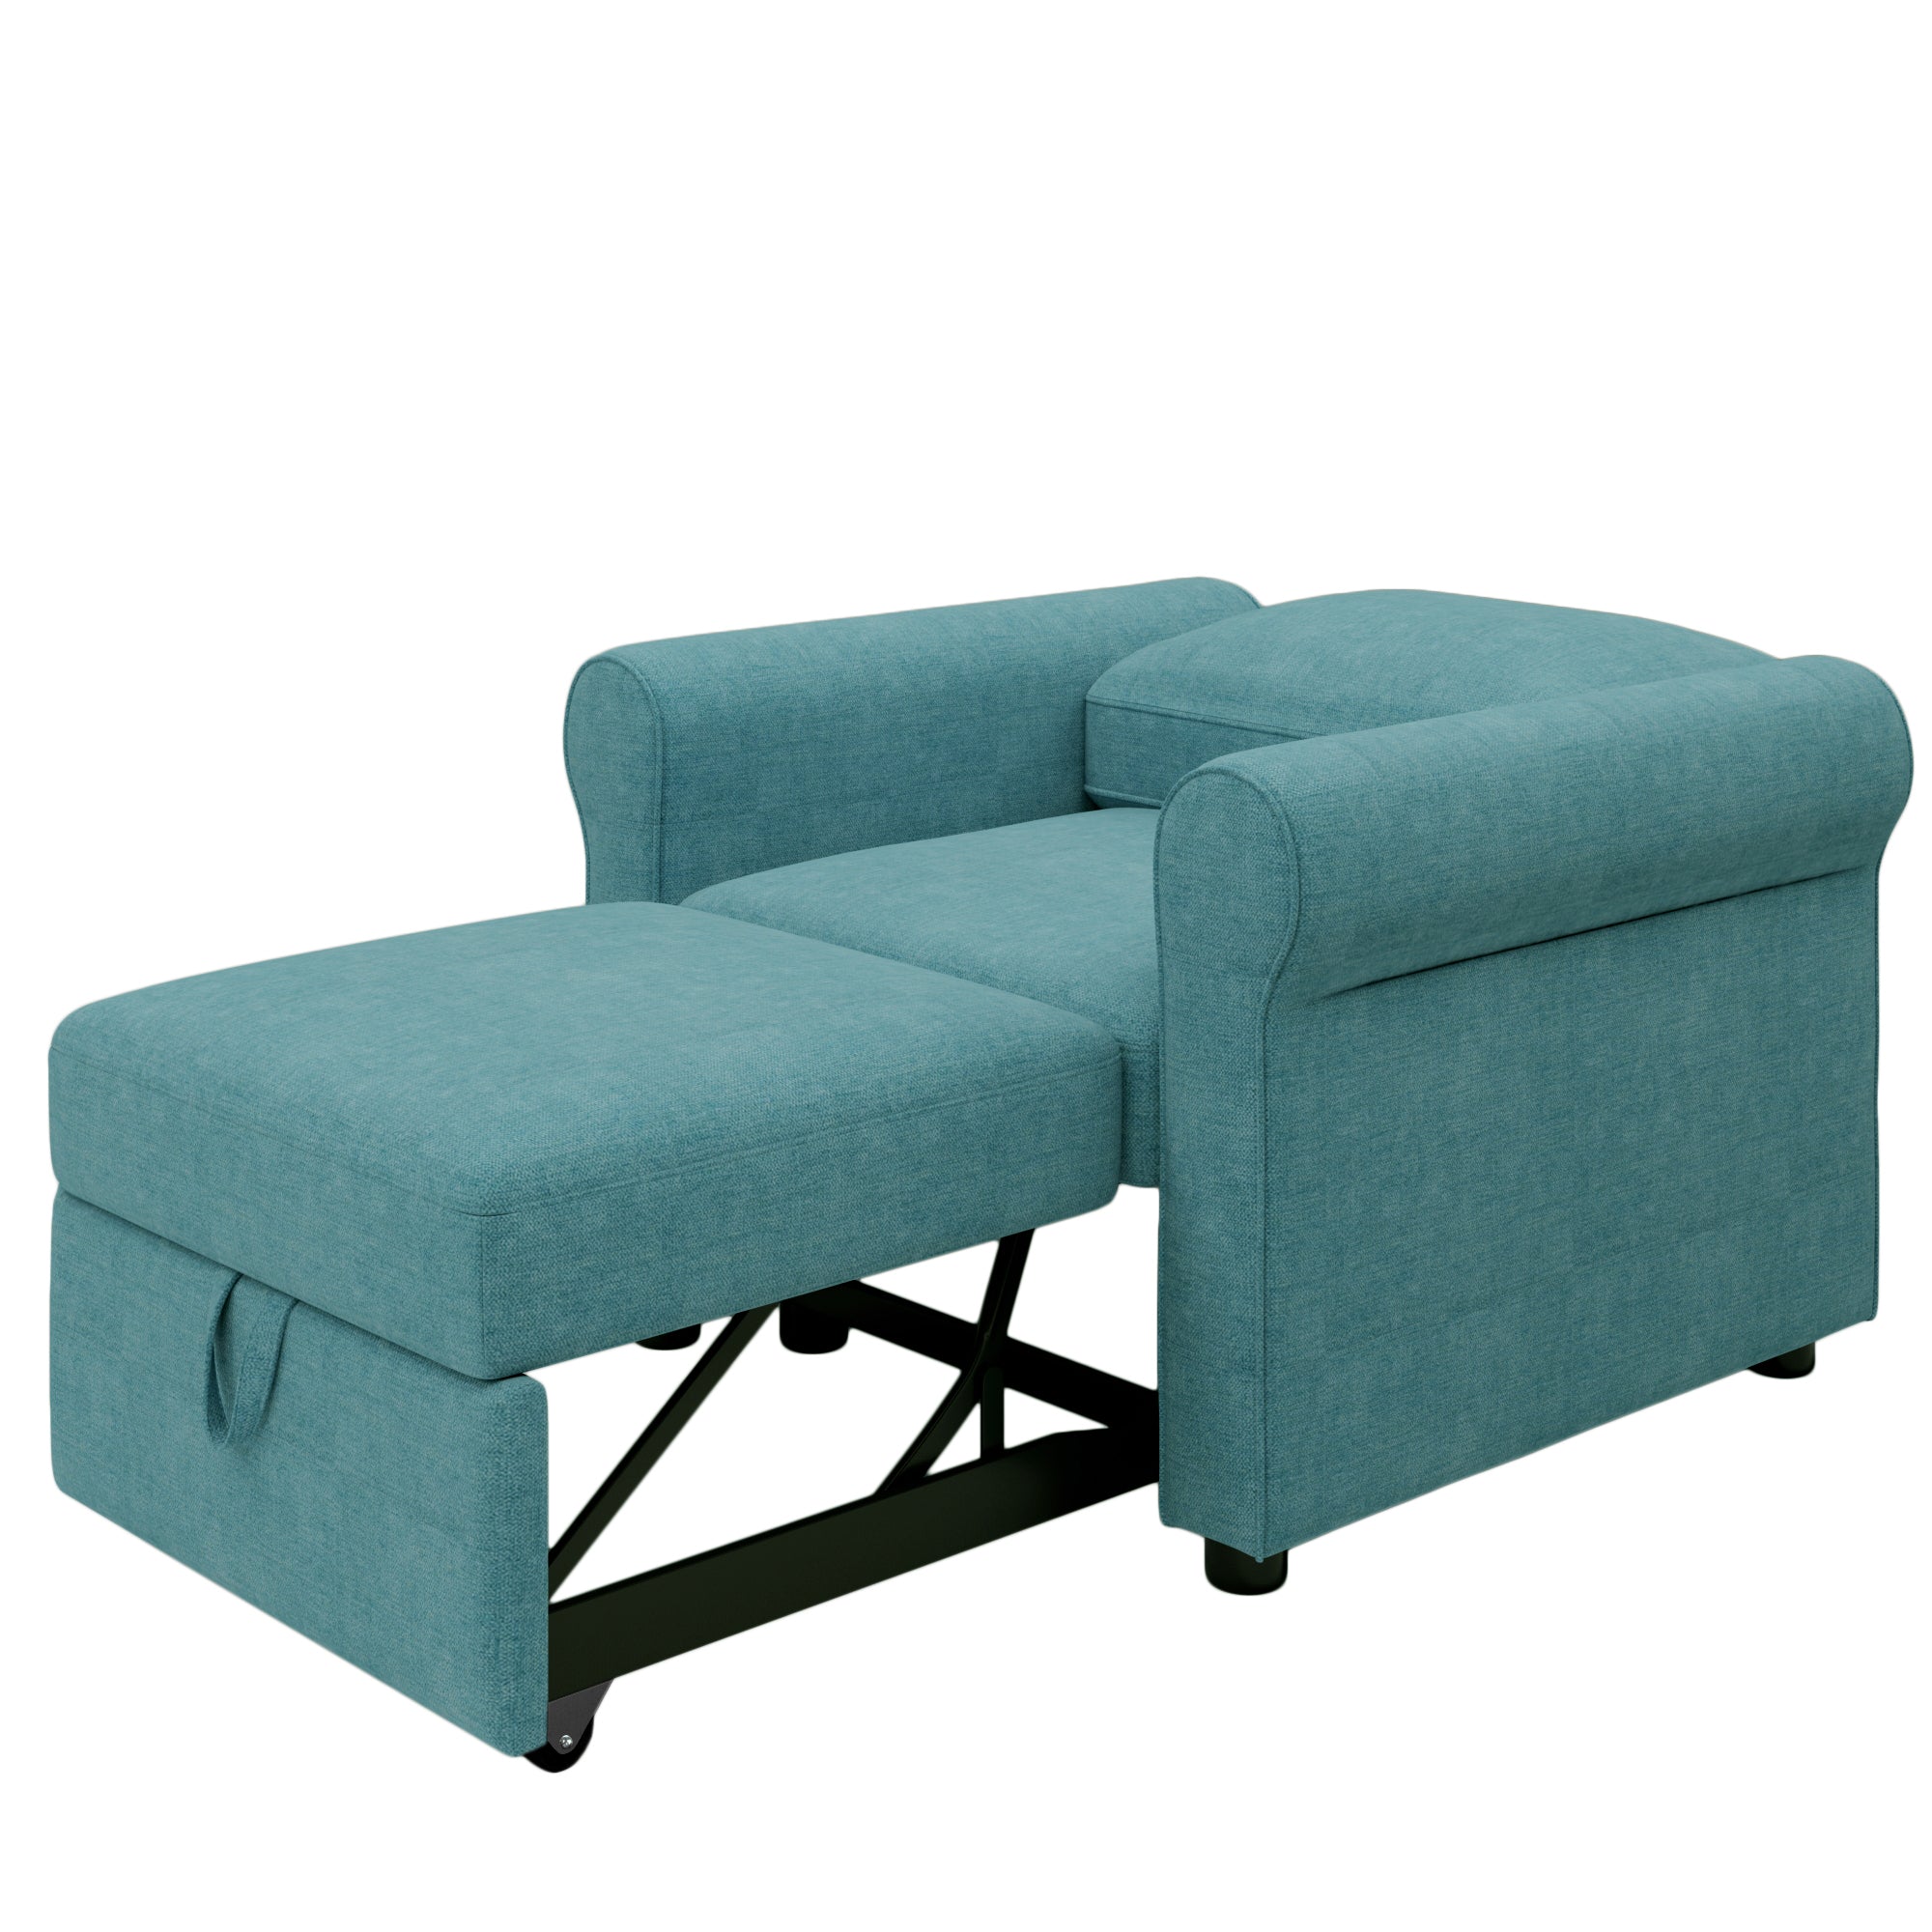 3-in-1 Single Pullout Sofa Bed Chair w/ Adjust Backrest & Curved Armrest, Green